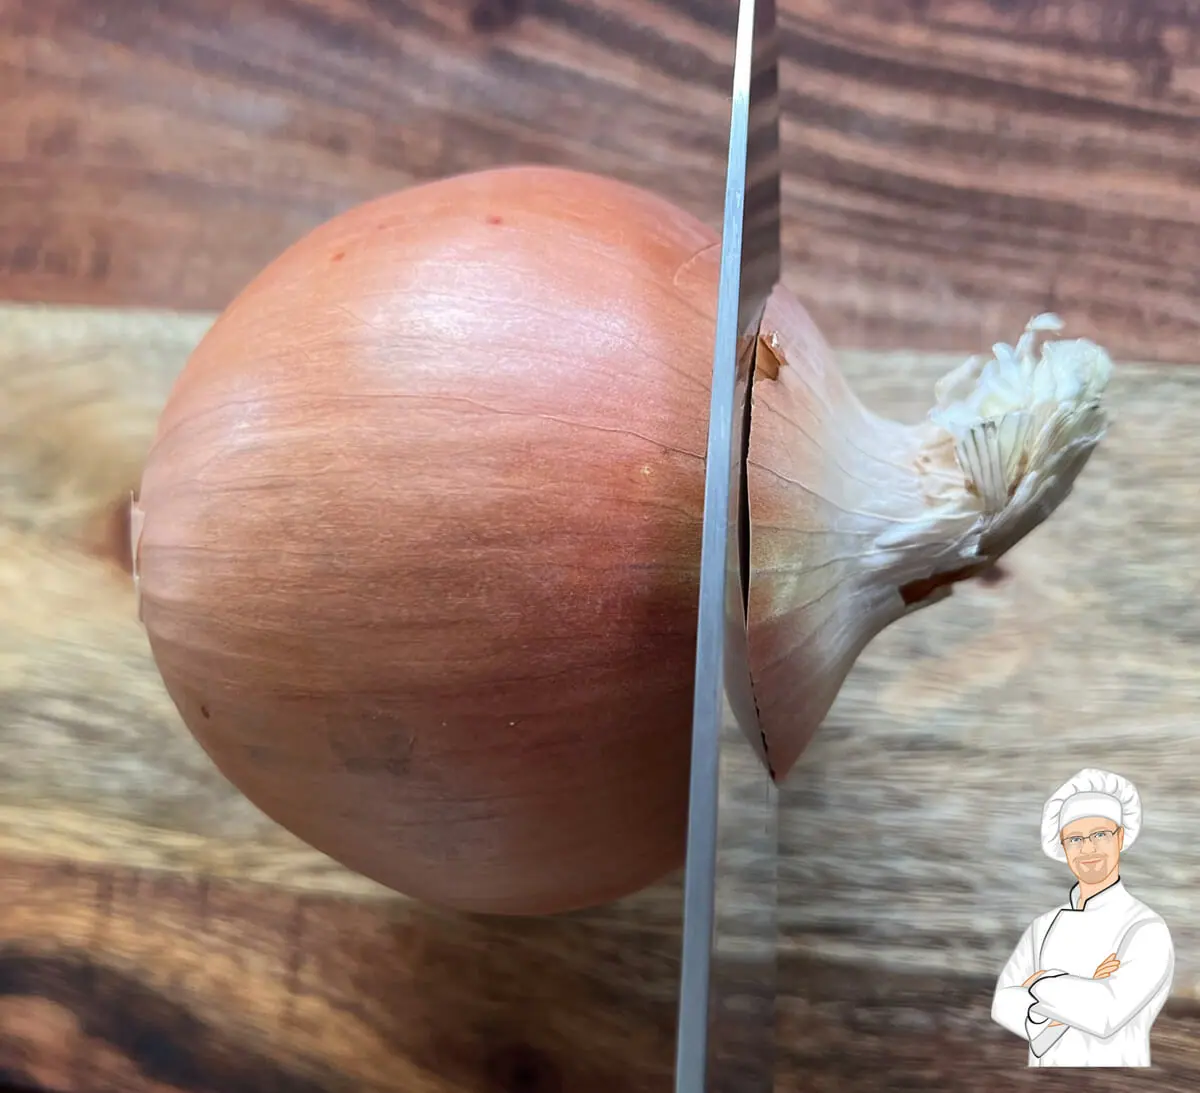 Step by step instructions, with video on how to easily peel and chop an onion.